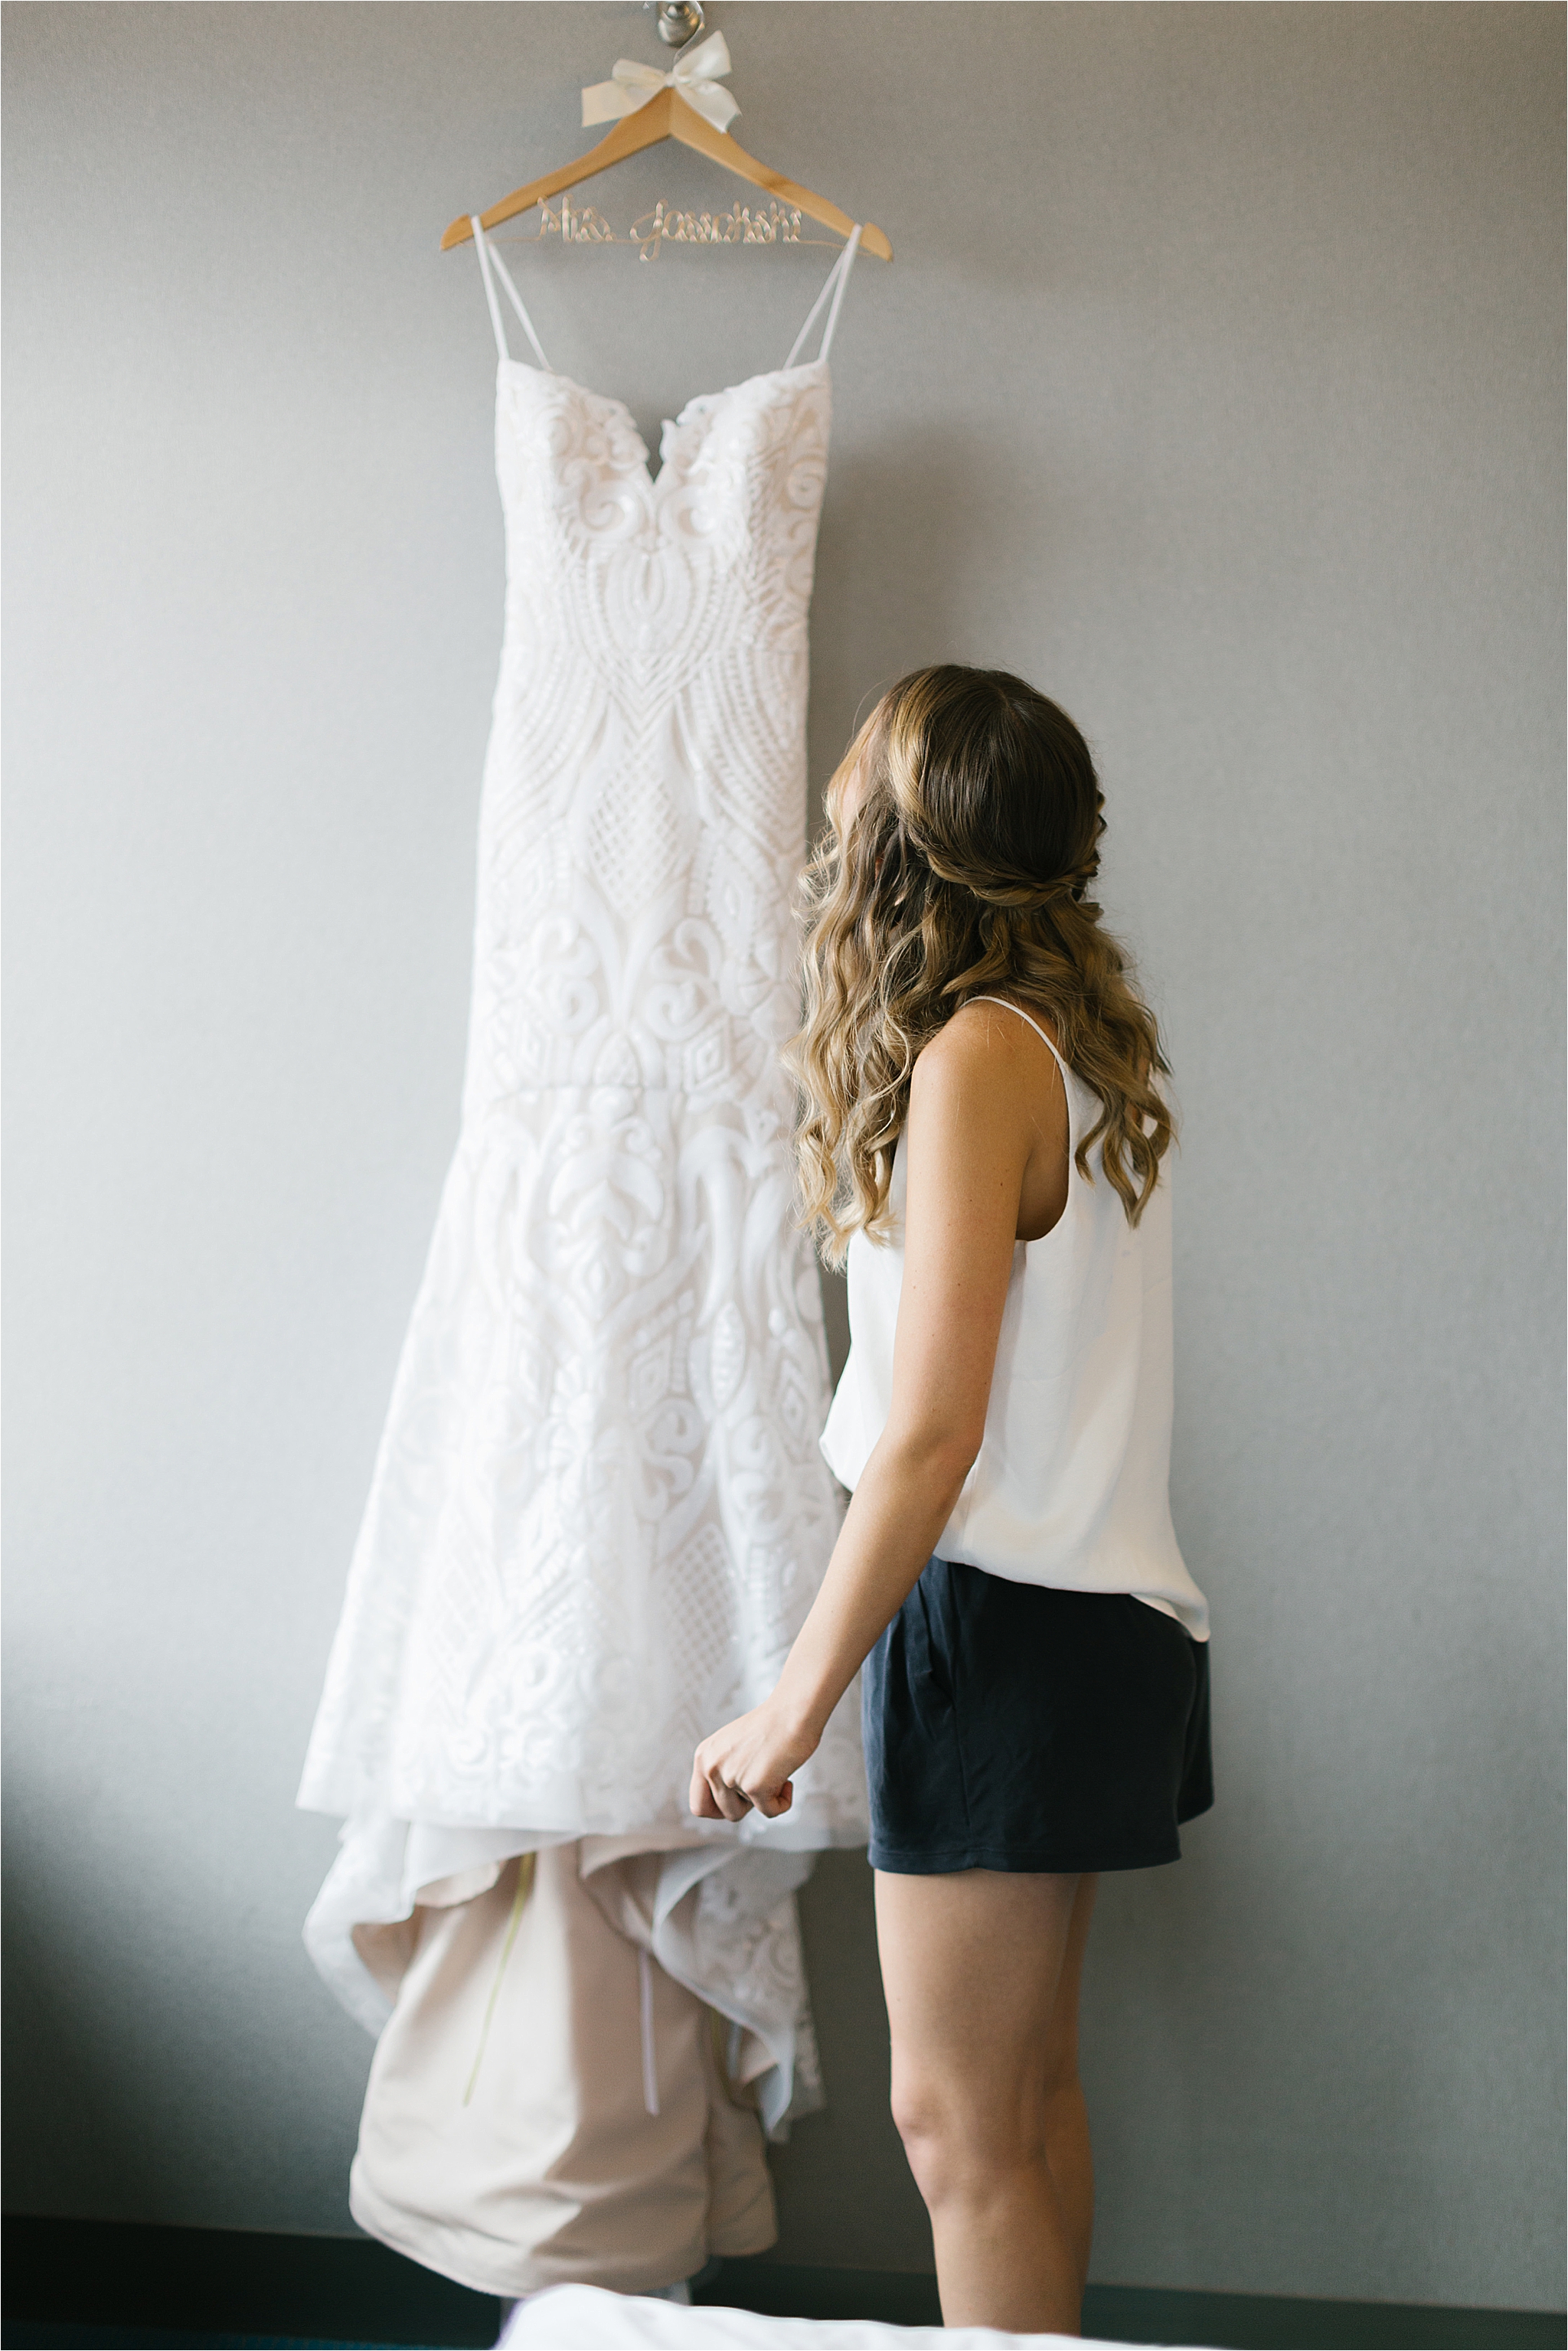 Cleveland bride looking at beaded blush Miss Hayley Paige wedding gown